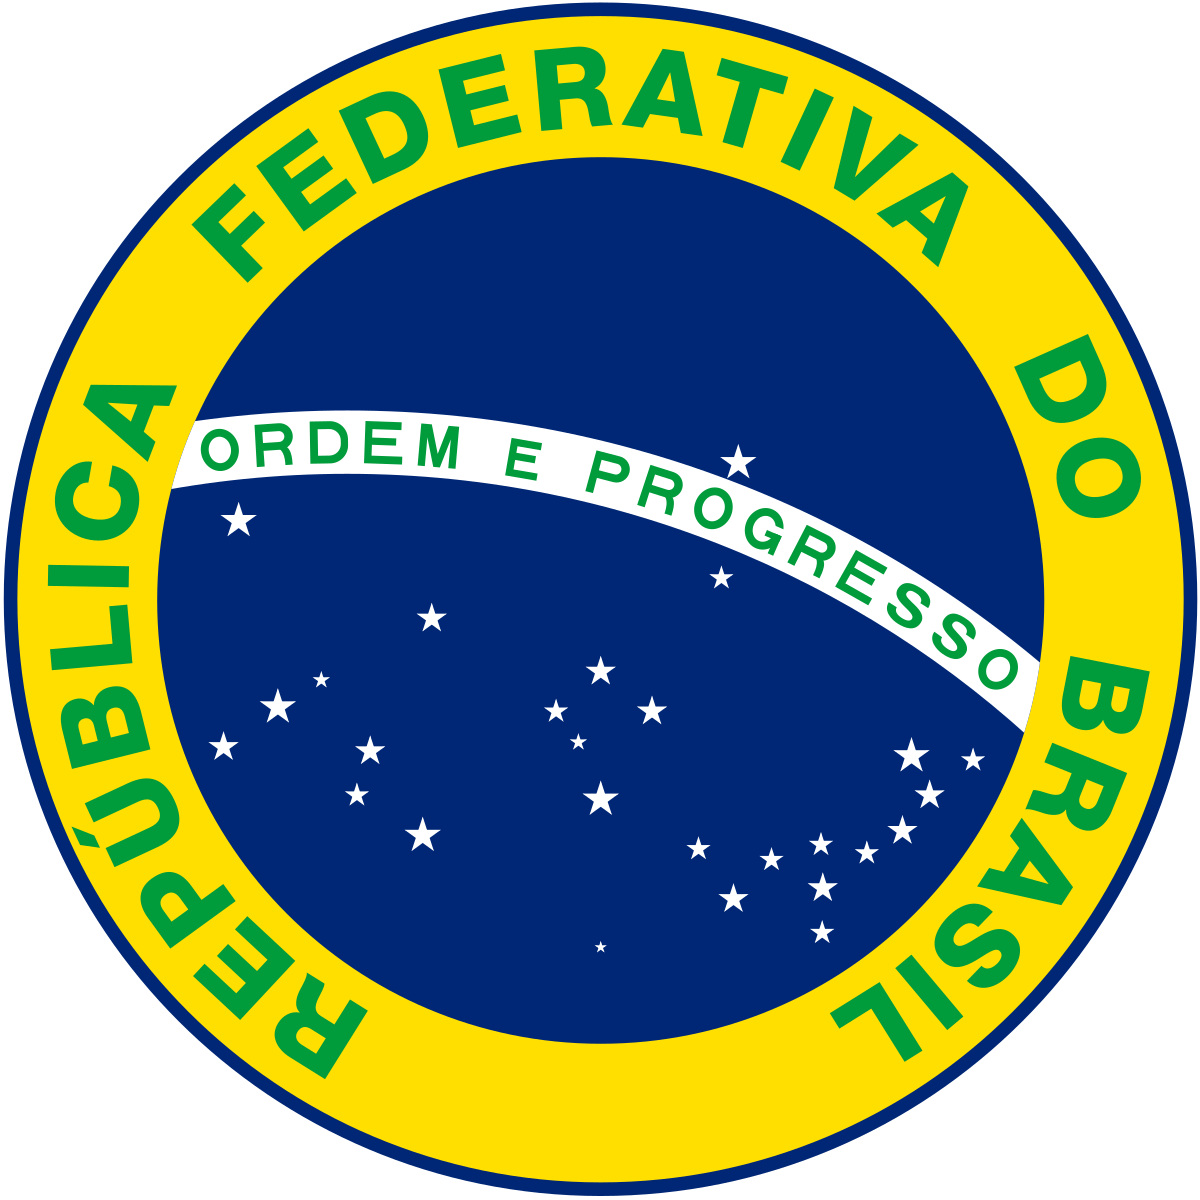 Federal government of Brazil logo